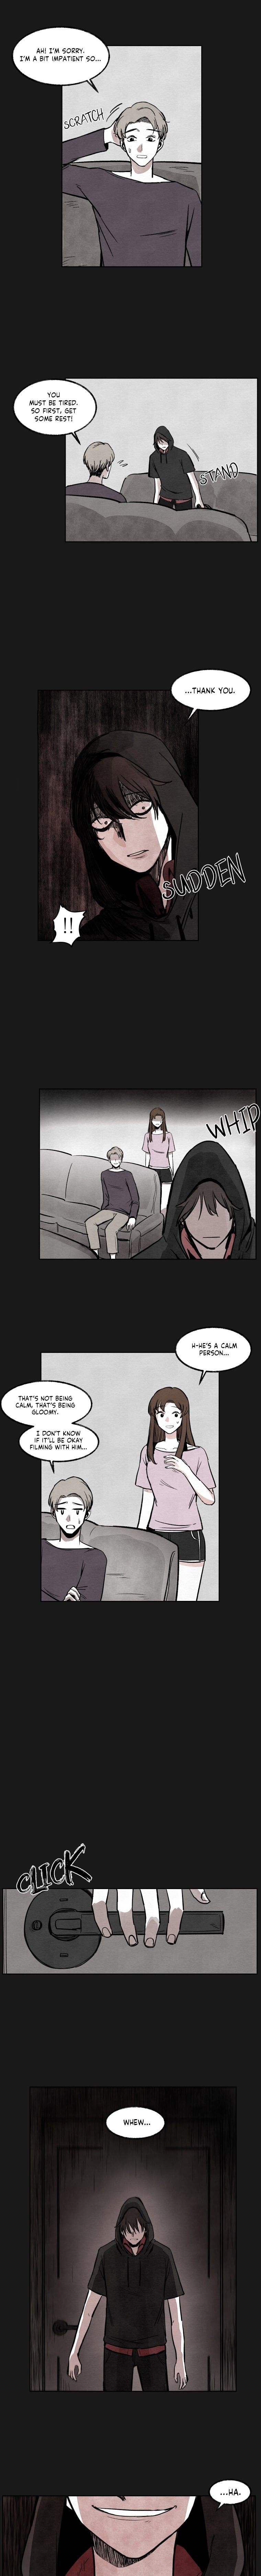 Devil’s Editing Chapter 1 - Page 7